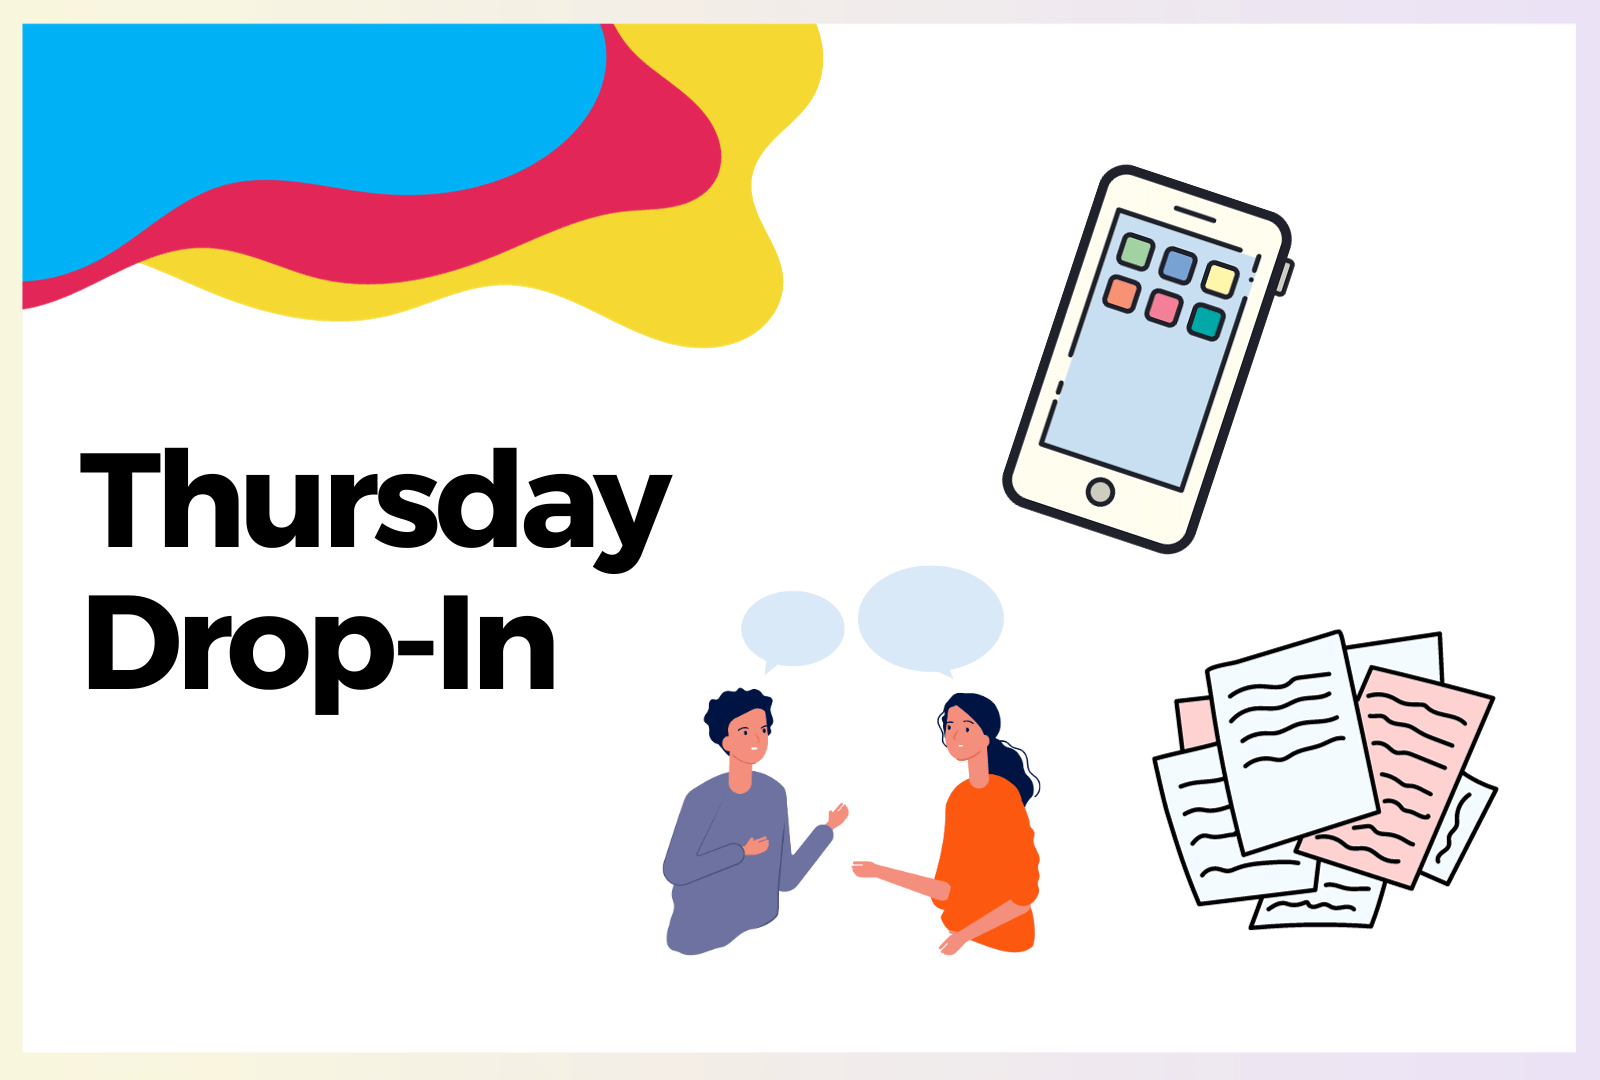 a title image saying "Thursday Drop-in" and depicting images of a mobile phone, a stack of documents and two people talking.